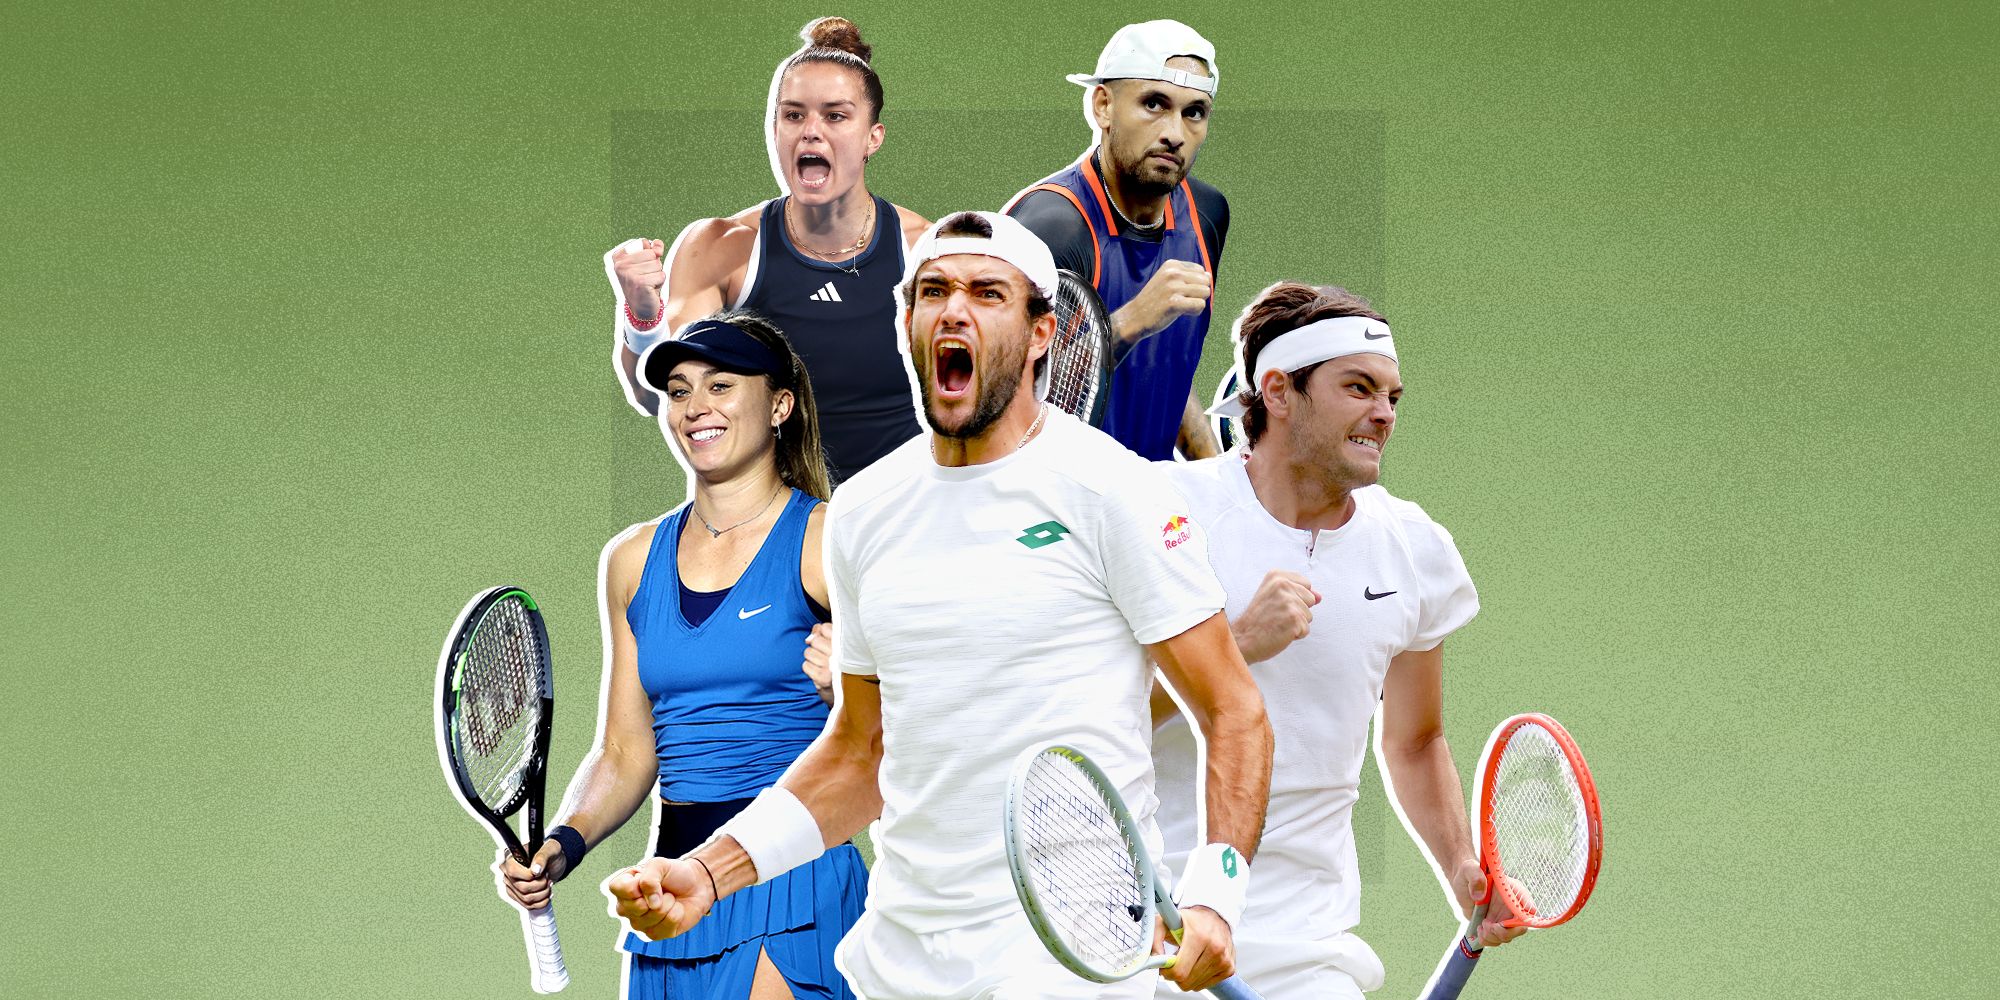 Indian Wells 2023: Where to watch, TV schedule, live streaming